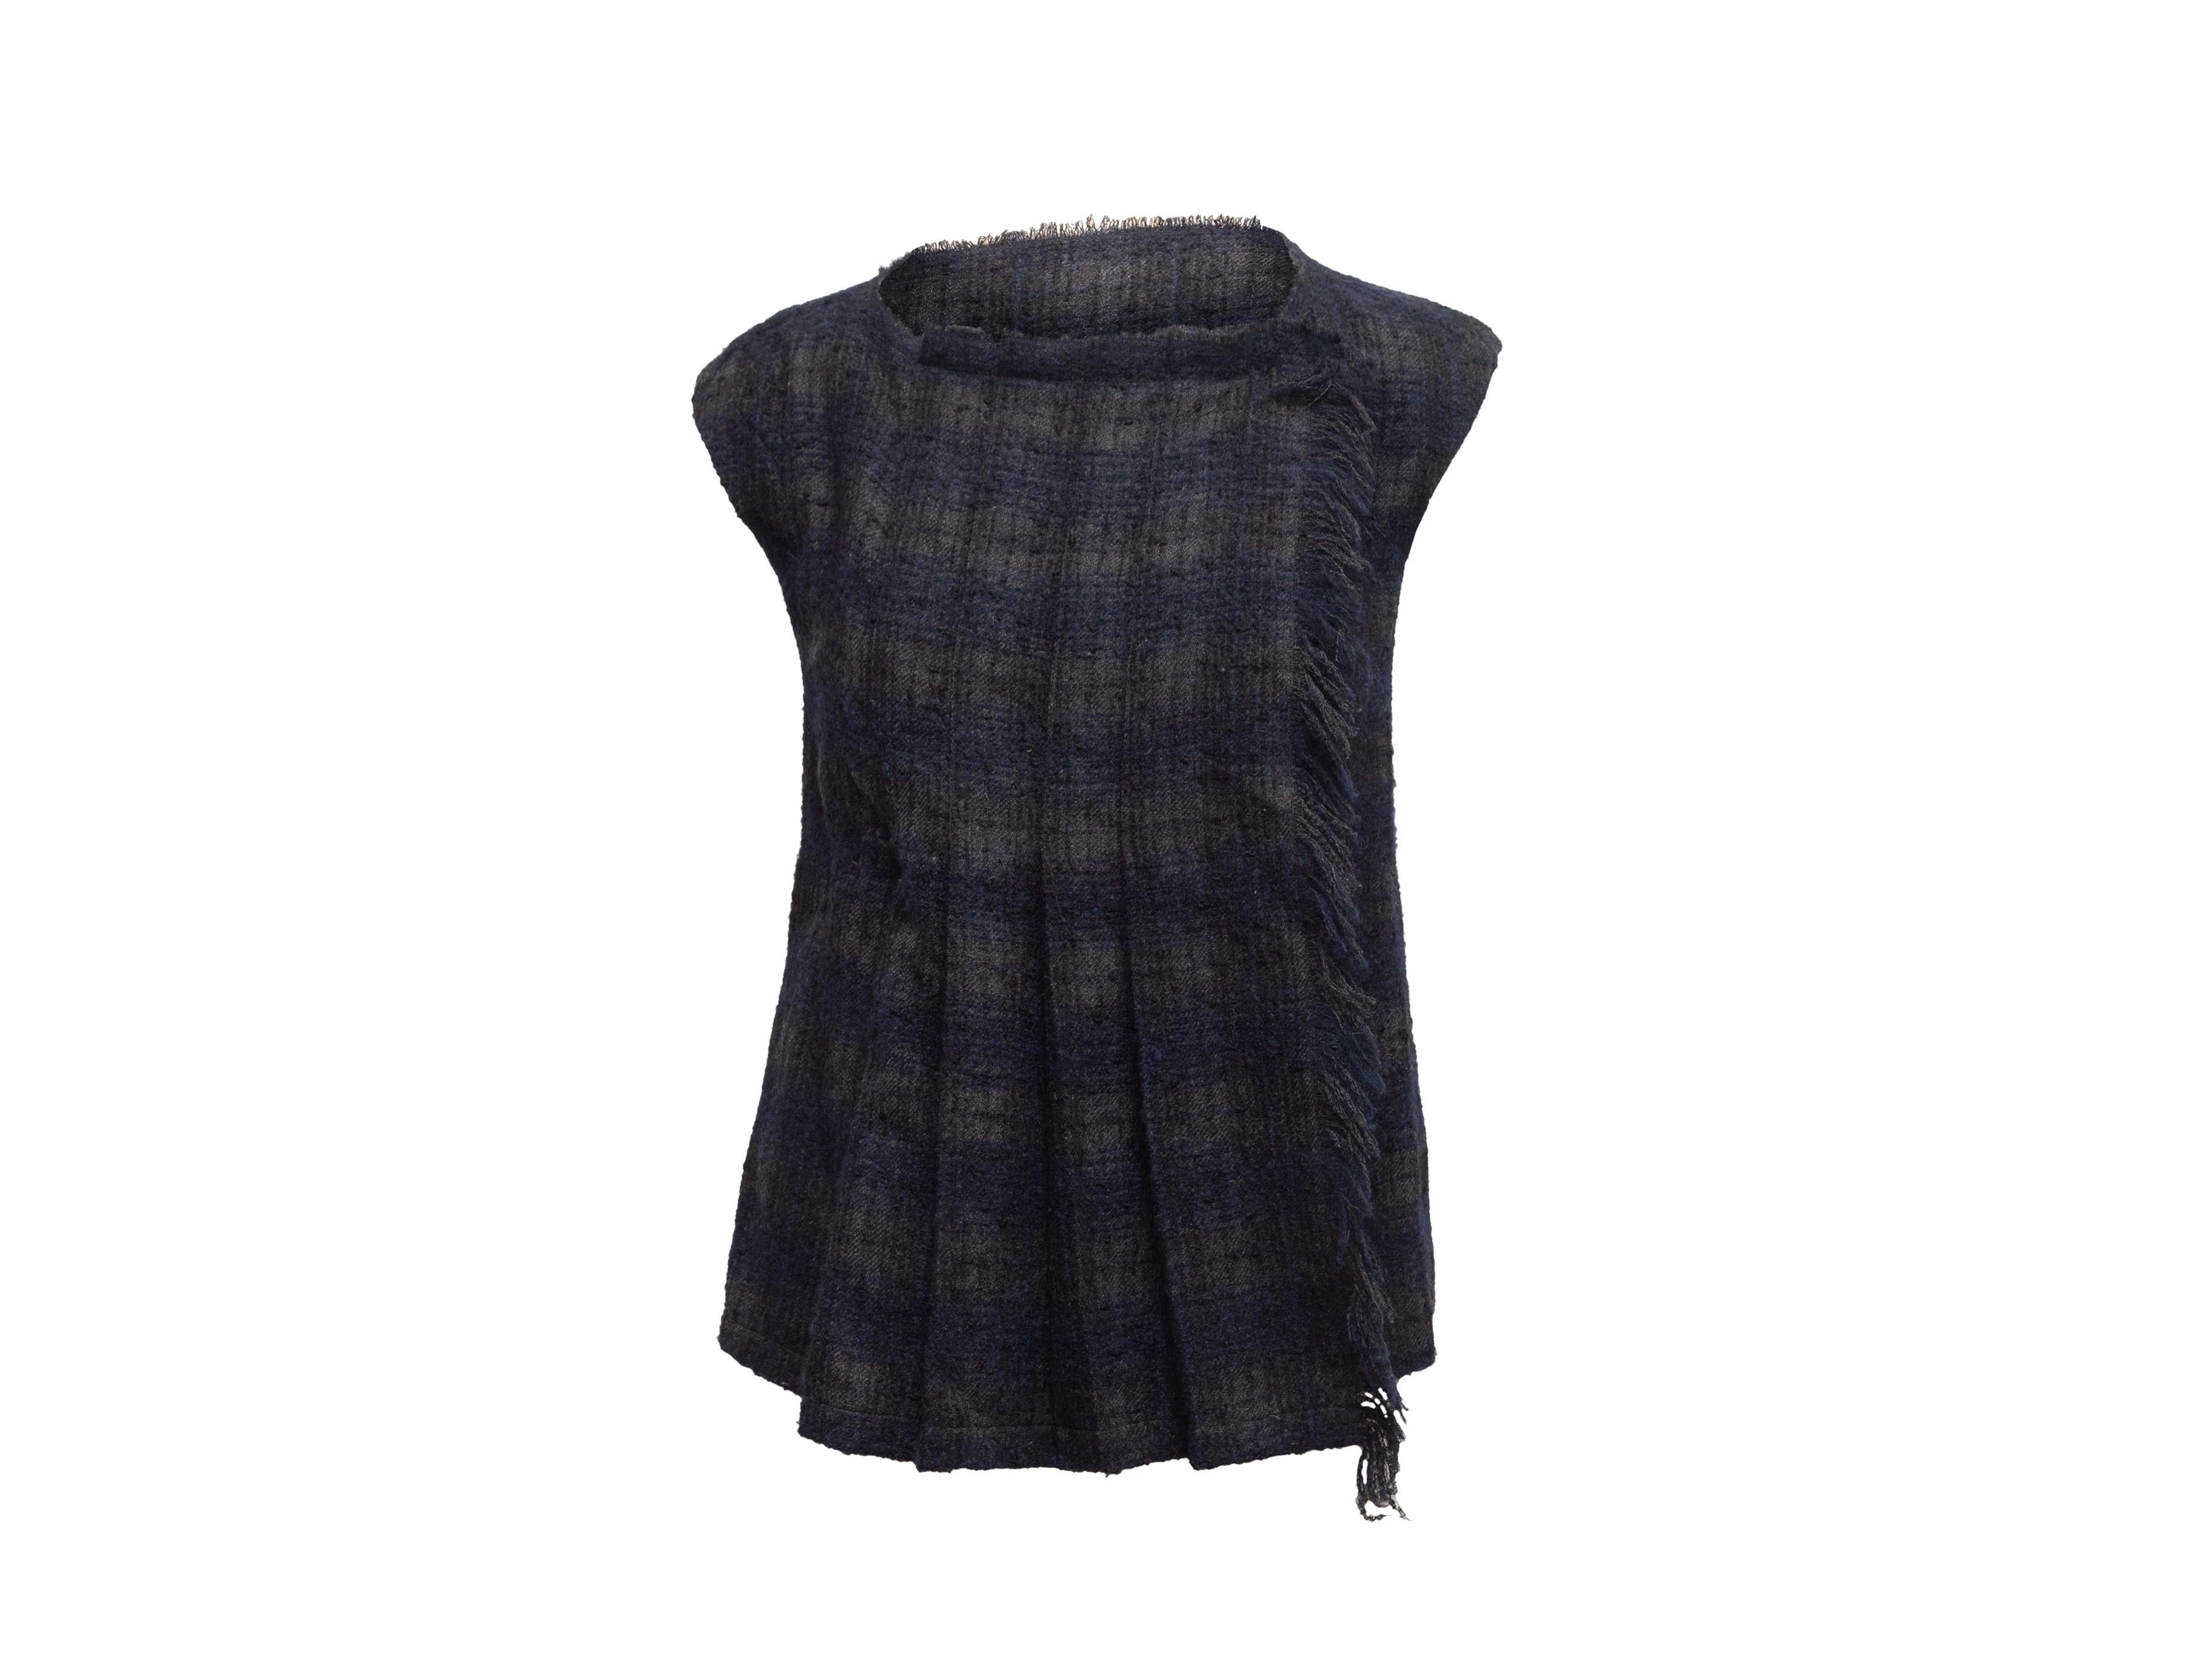 Product details: Black and navy wool-blend raw-edge sleeveless top by Chanel. Plaid pattern throughout. Round neckline. Closure at front. Designer size 38. 32